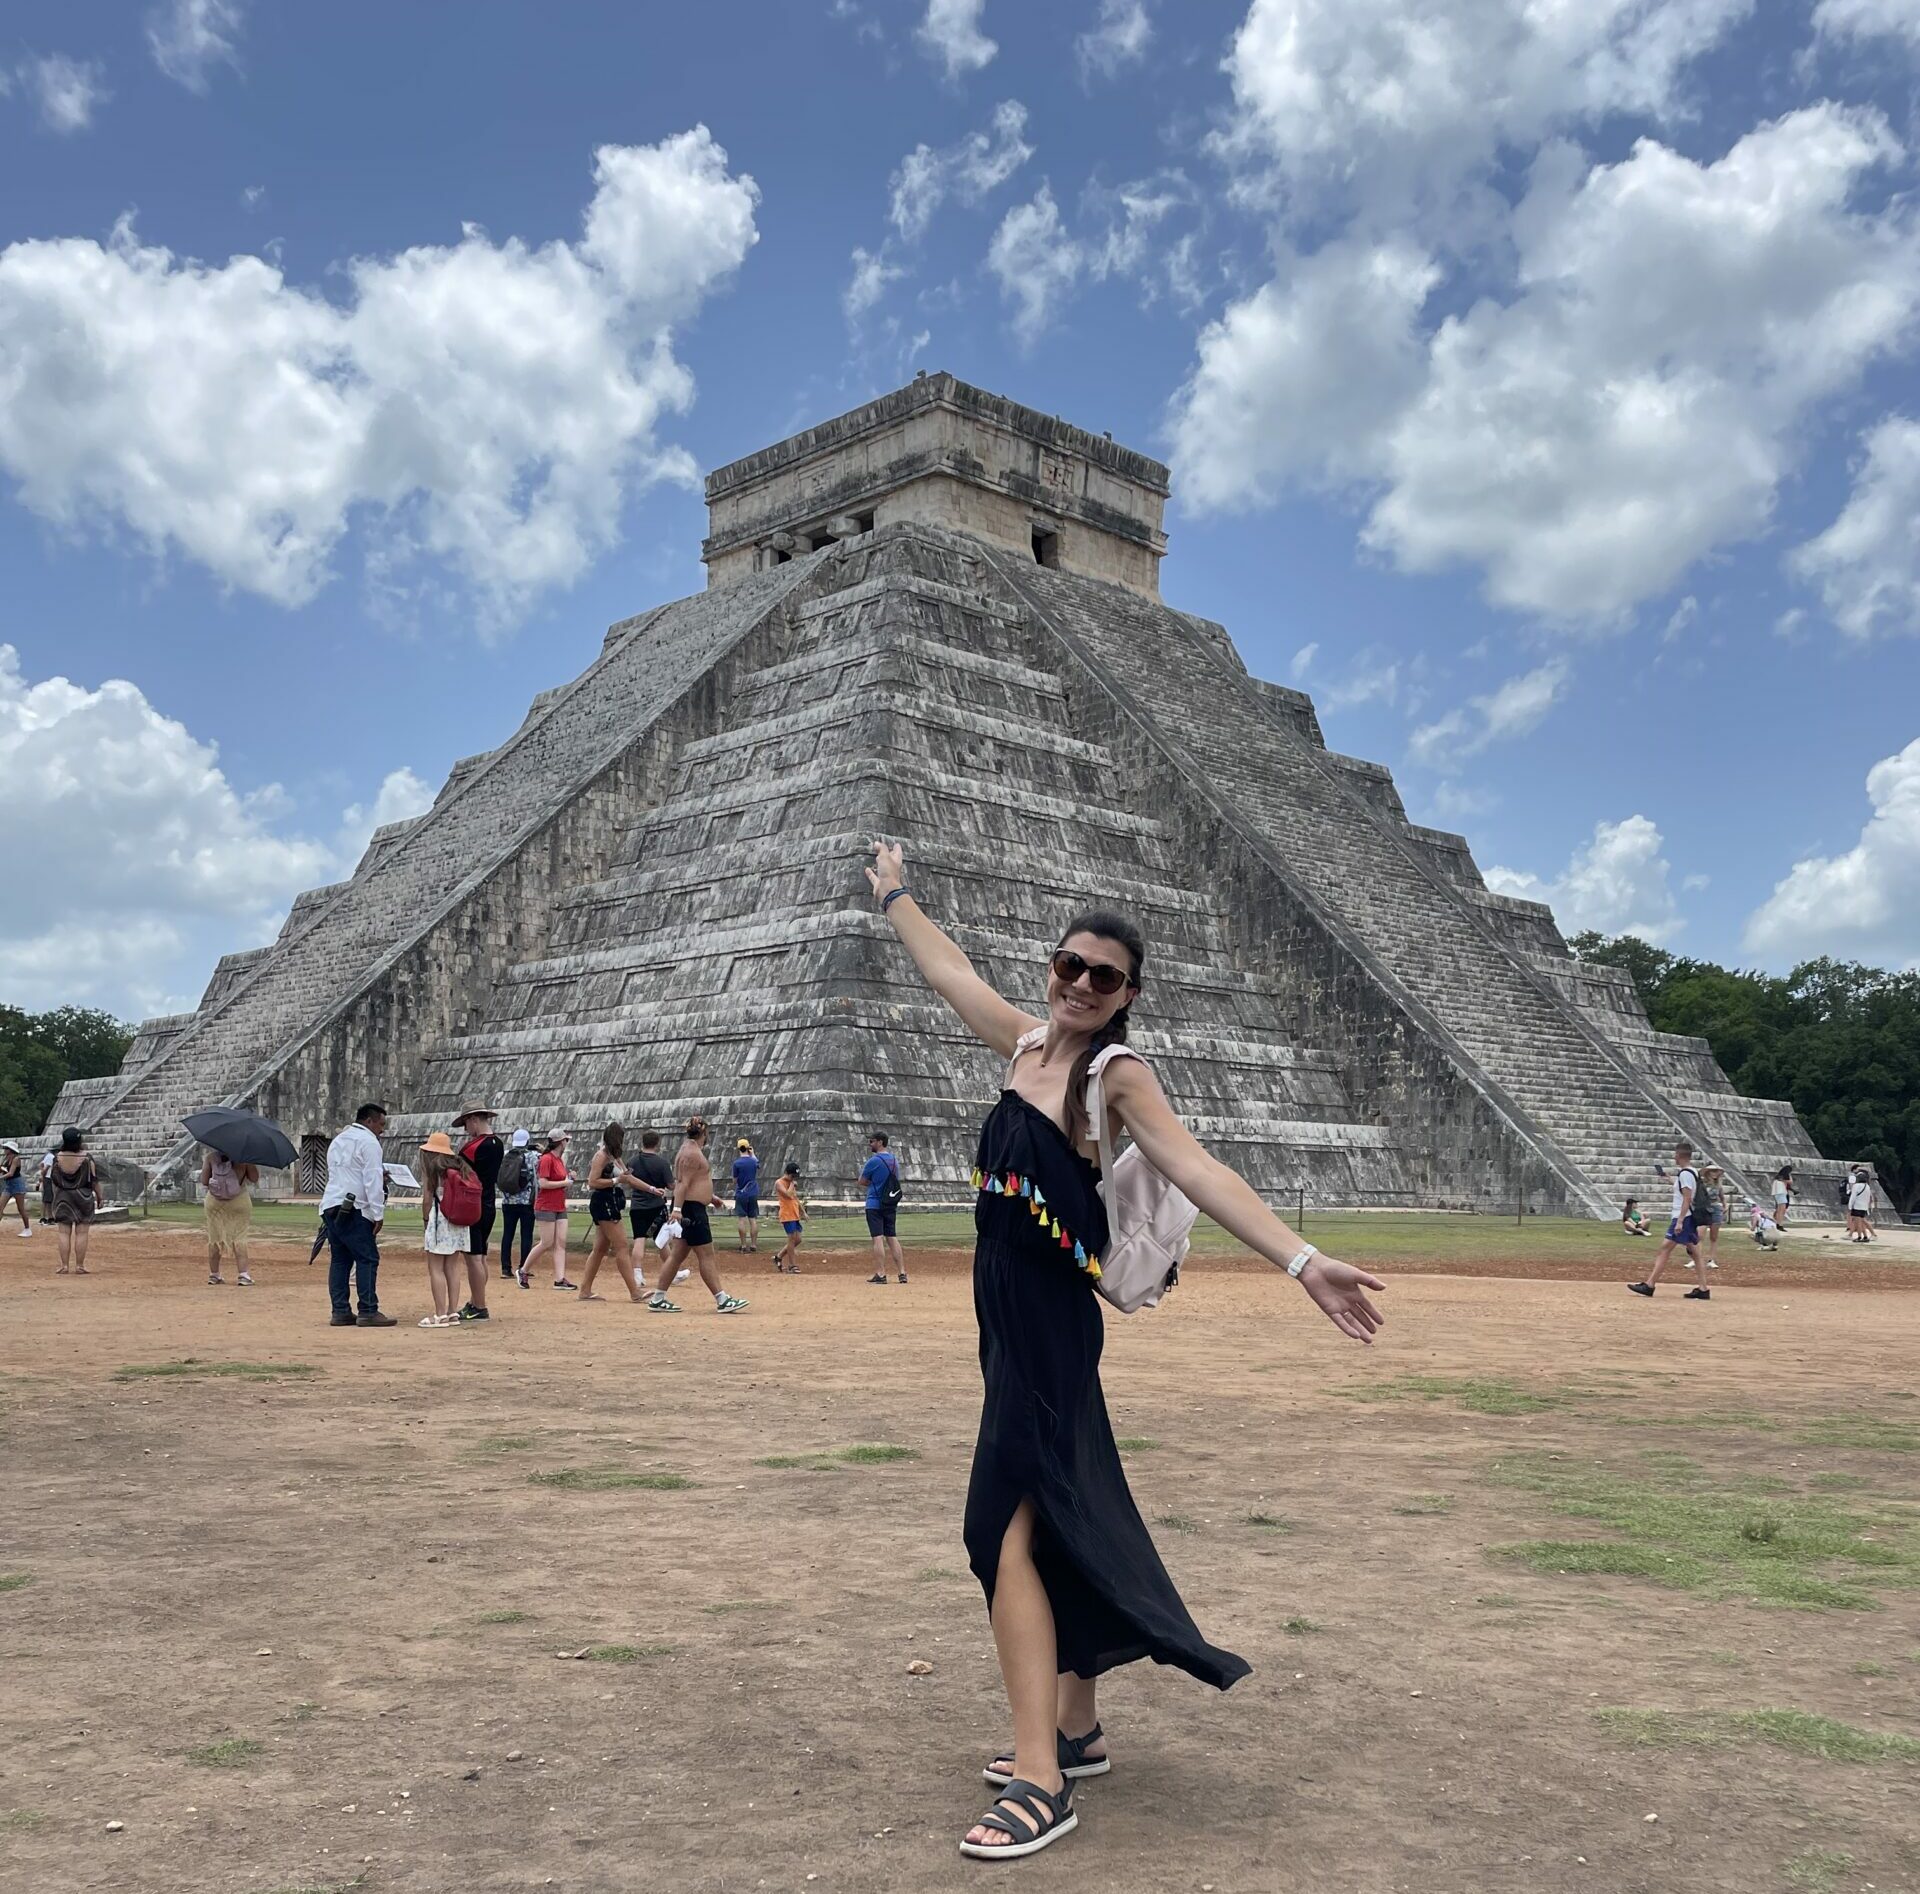 11 interesting facts about Chichen Itza Mexico